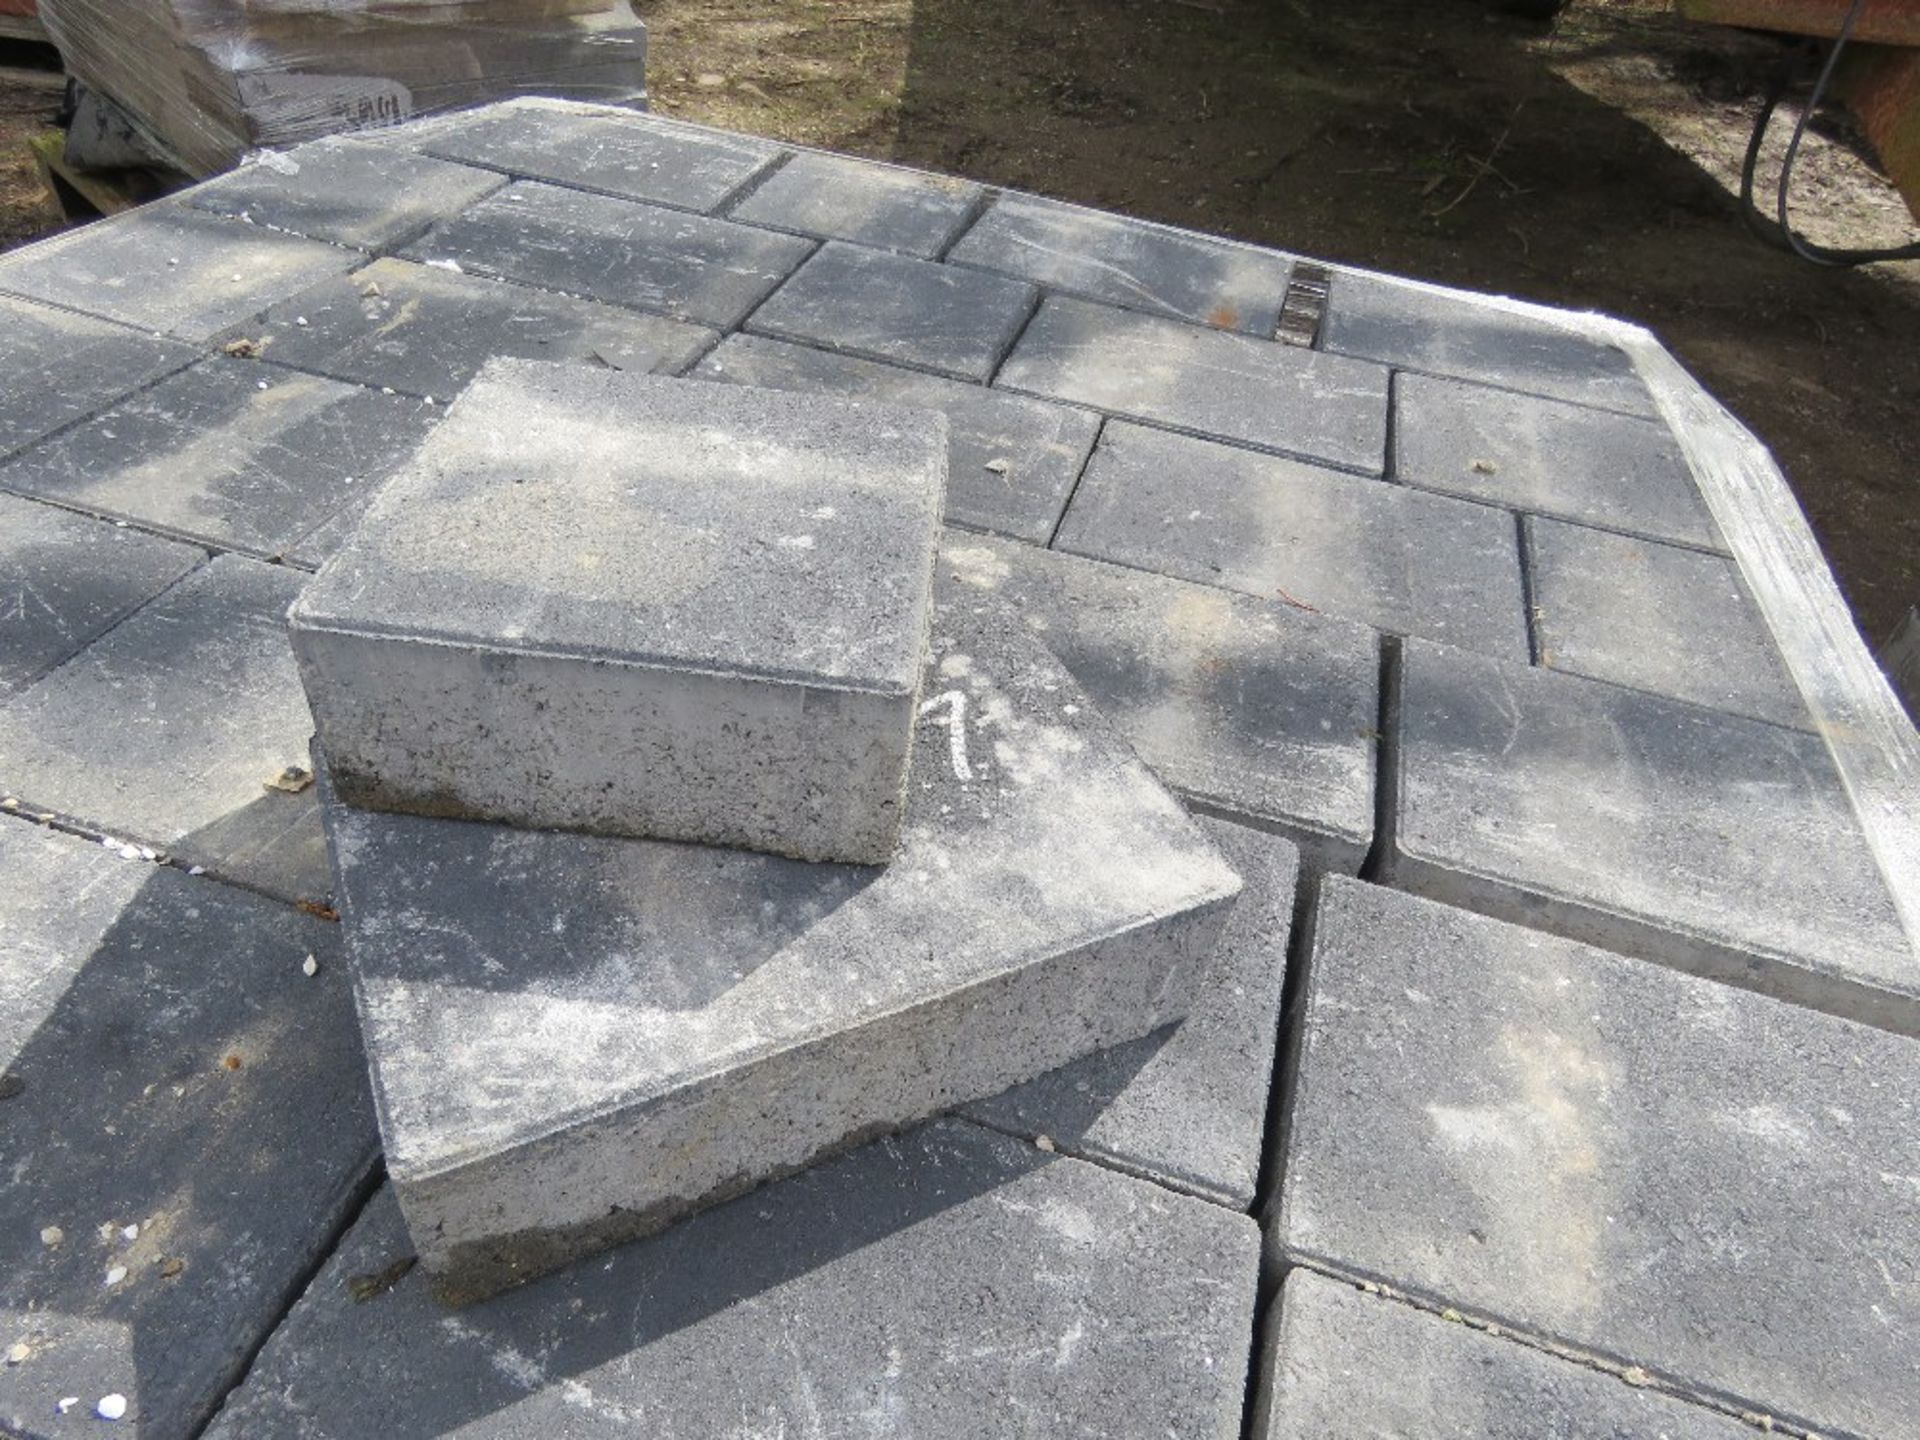 2 X PALLETS OF BLOCK PAVERS, BLACK COLOURED. - Image 4 of 7